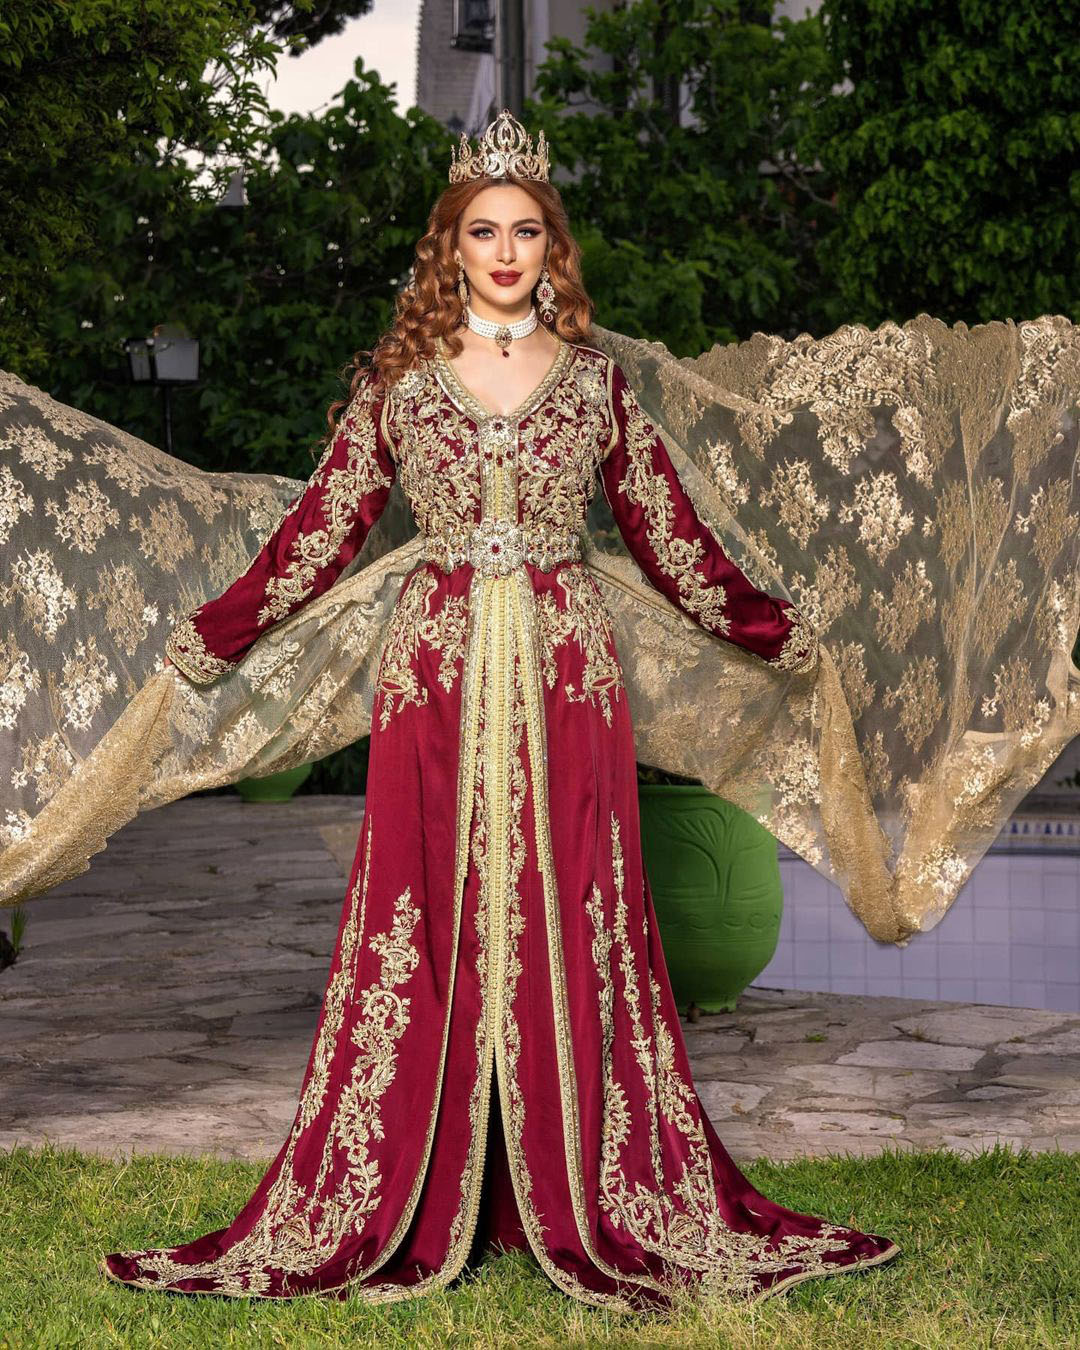 

Elegant Burgundy Kaftan Moroccan Formal Evening Dresses With Gold Lace Appliques Regular Long Sleeves Saudi Arabic Prom Dress Traditional Mariage Women Gowns, Dark navy